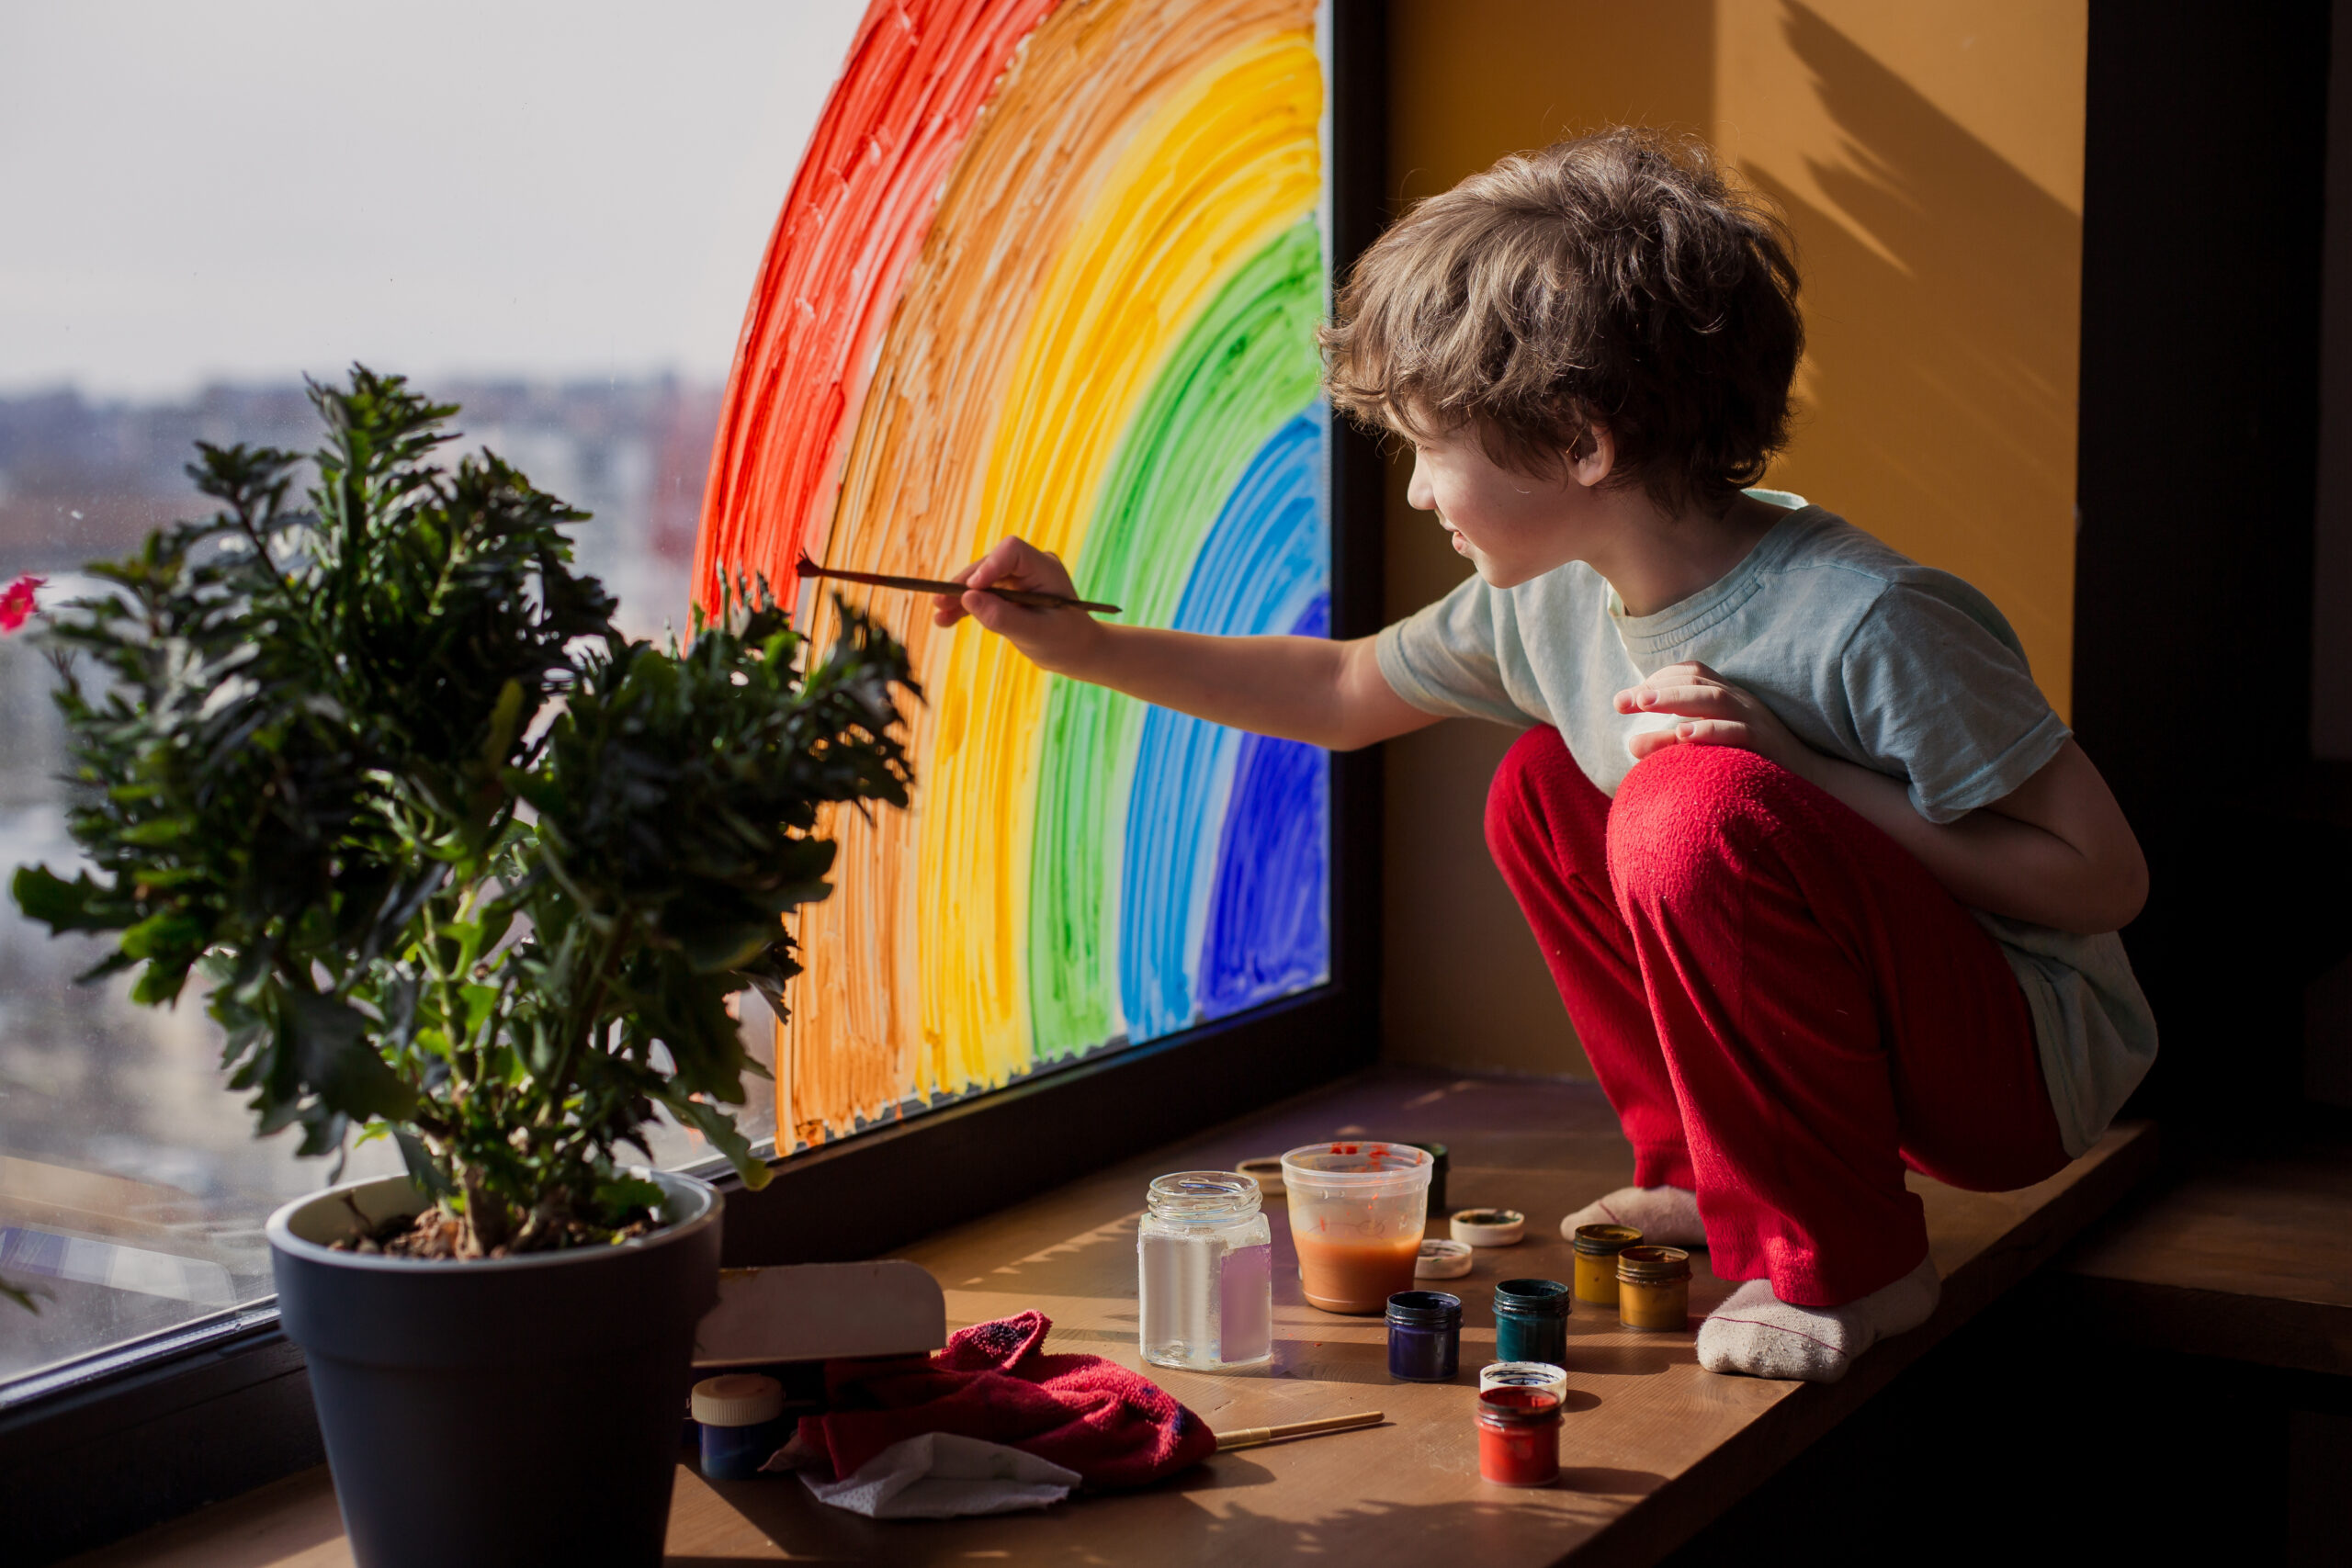 A child with light skin stopped on a window seat painting a rainbow onto the corner of a large window overlooking a blurred city. There are paints laying around him and a potted plant.